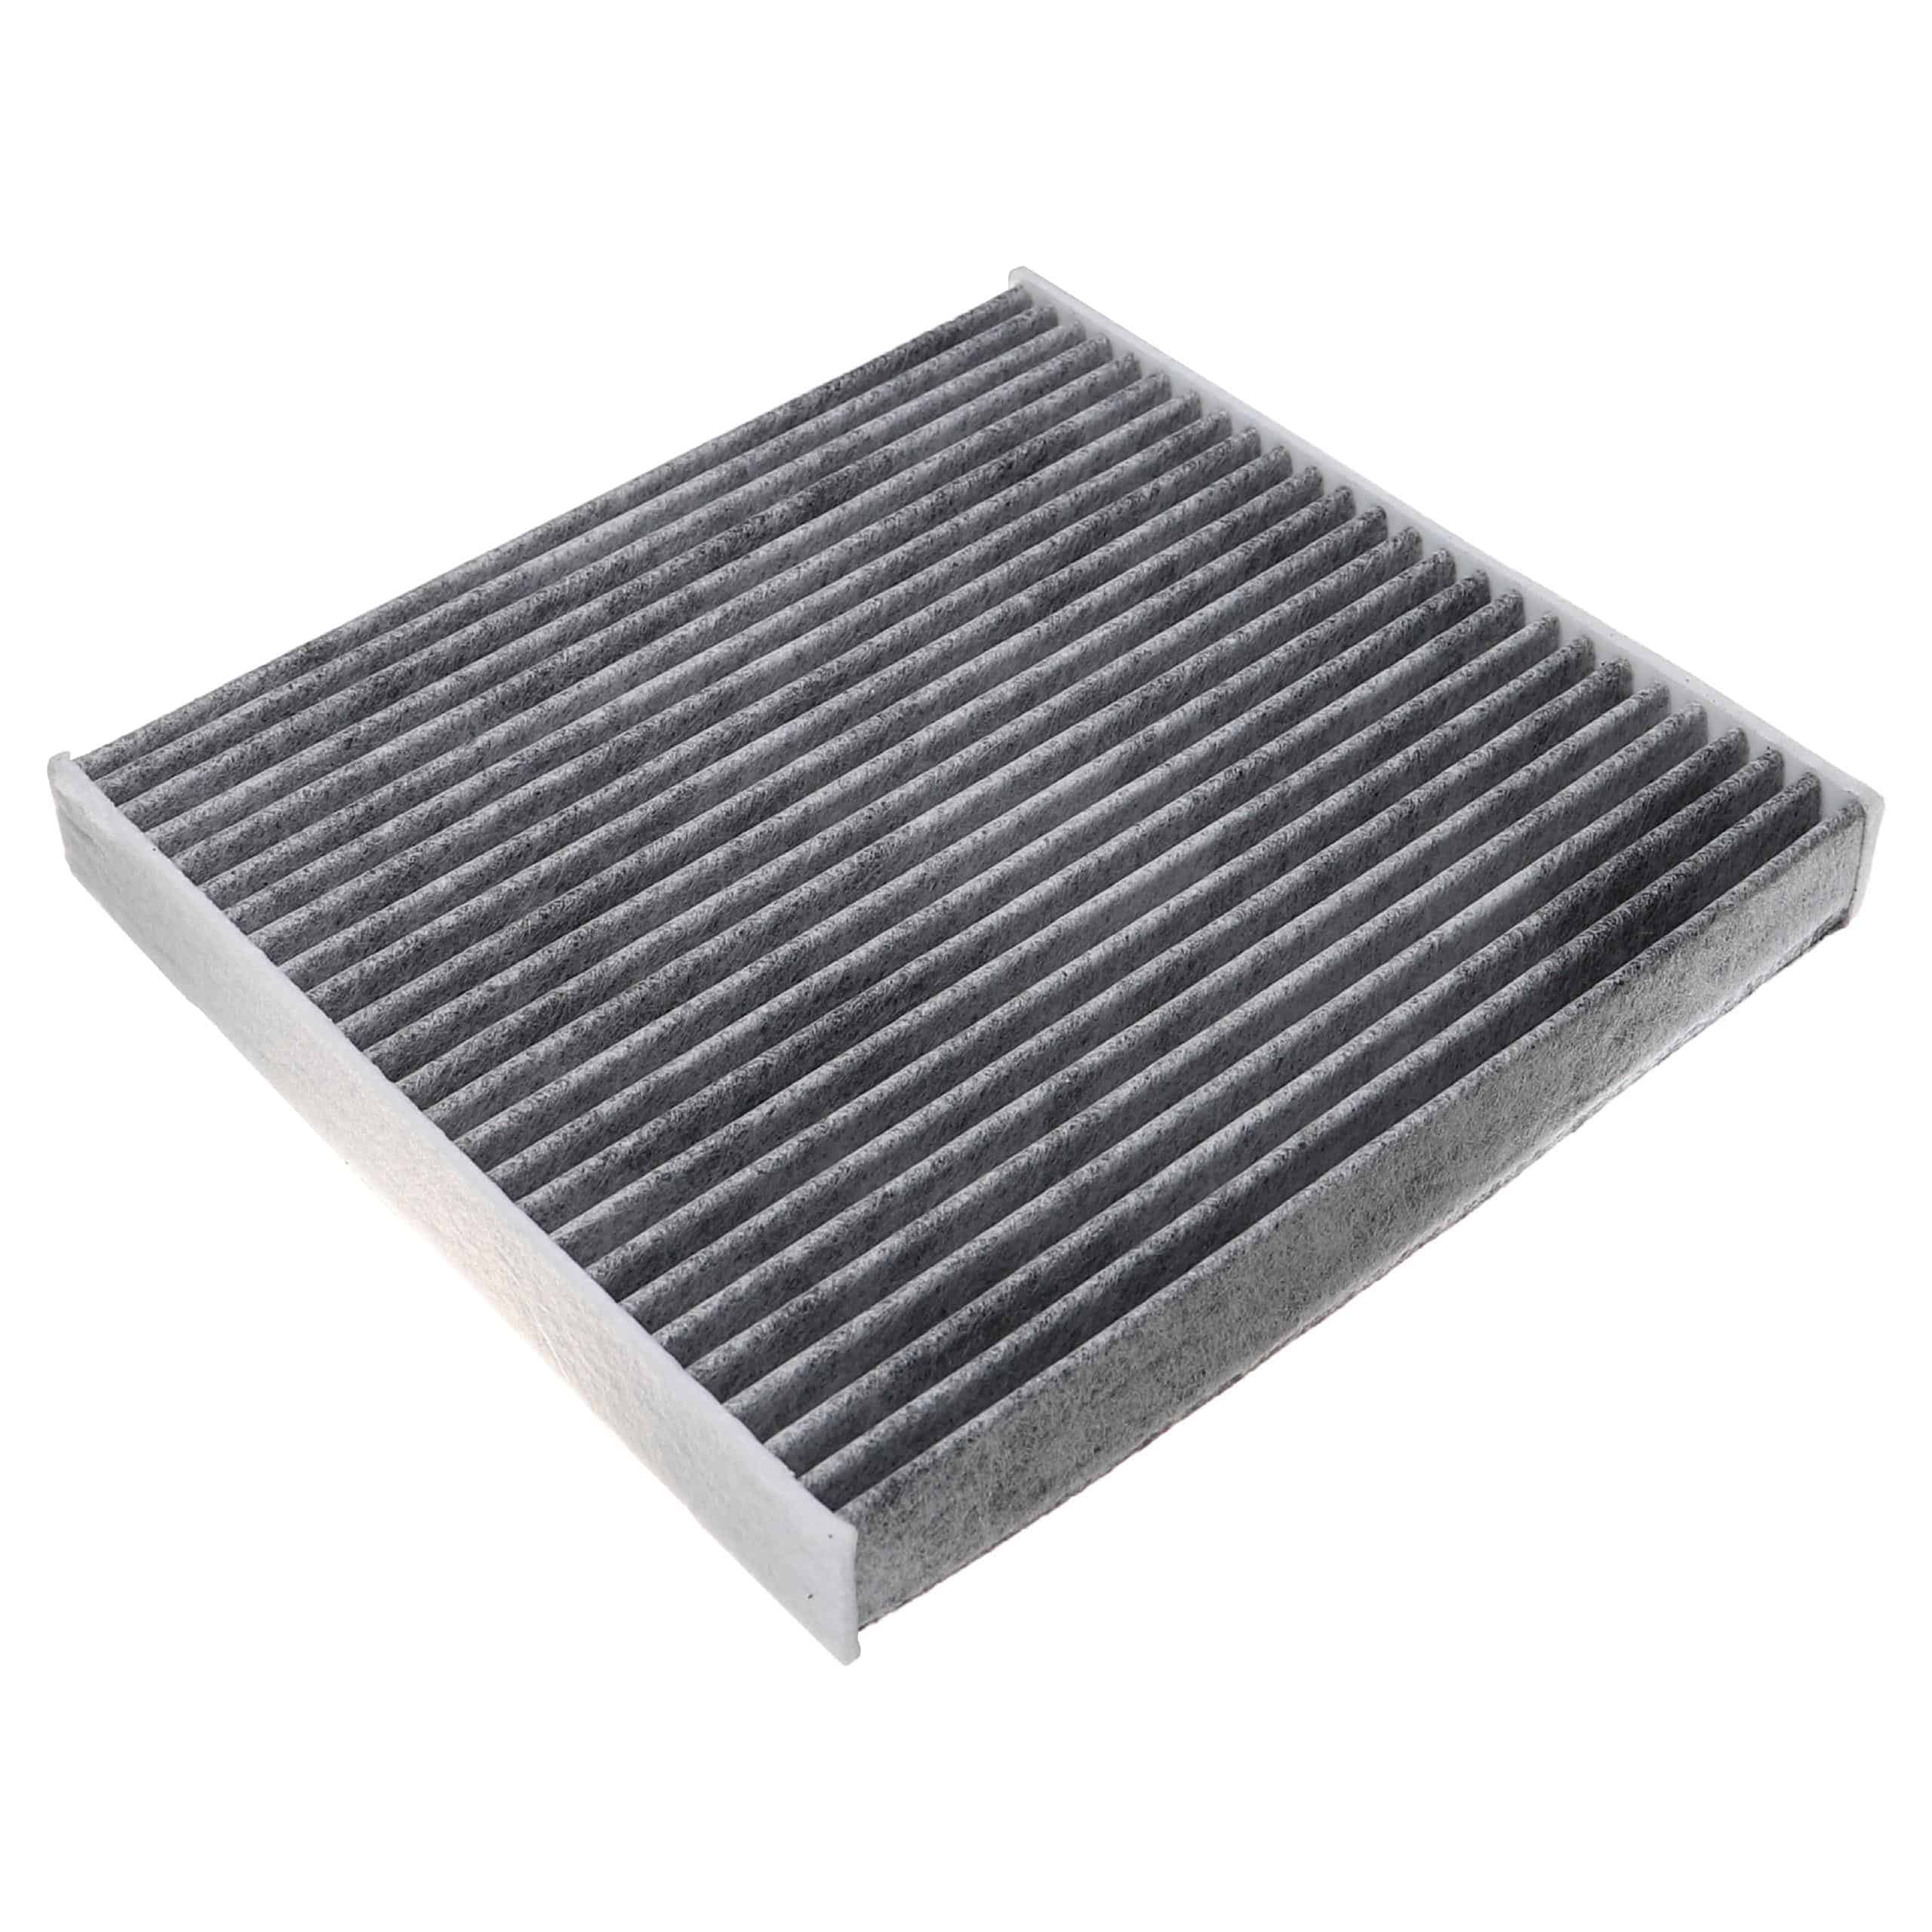 Cabin Air Filter replaces 3F Quality 1599 etc.